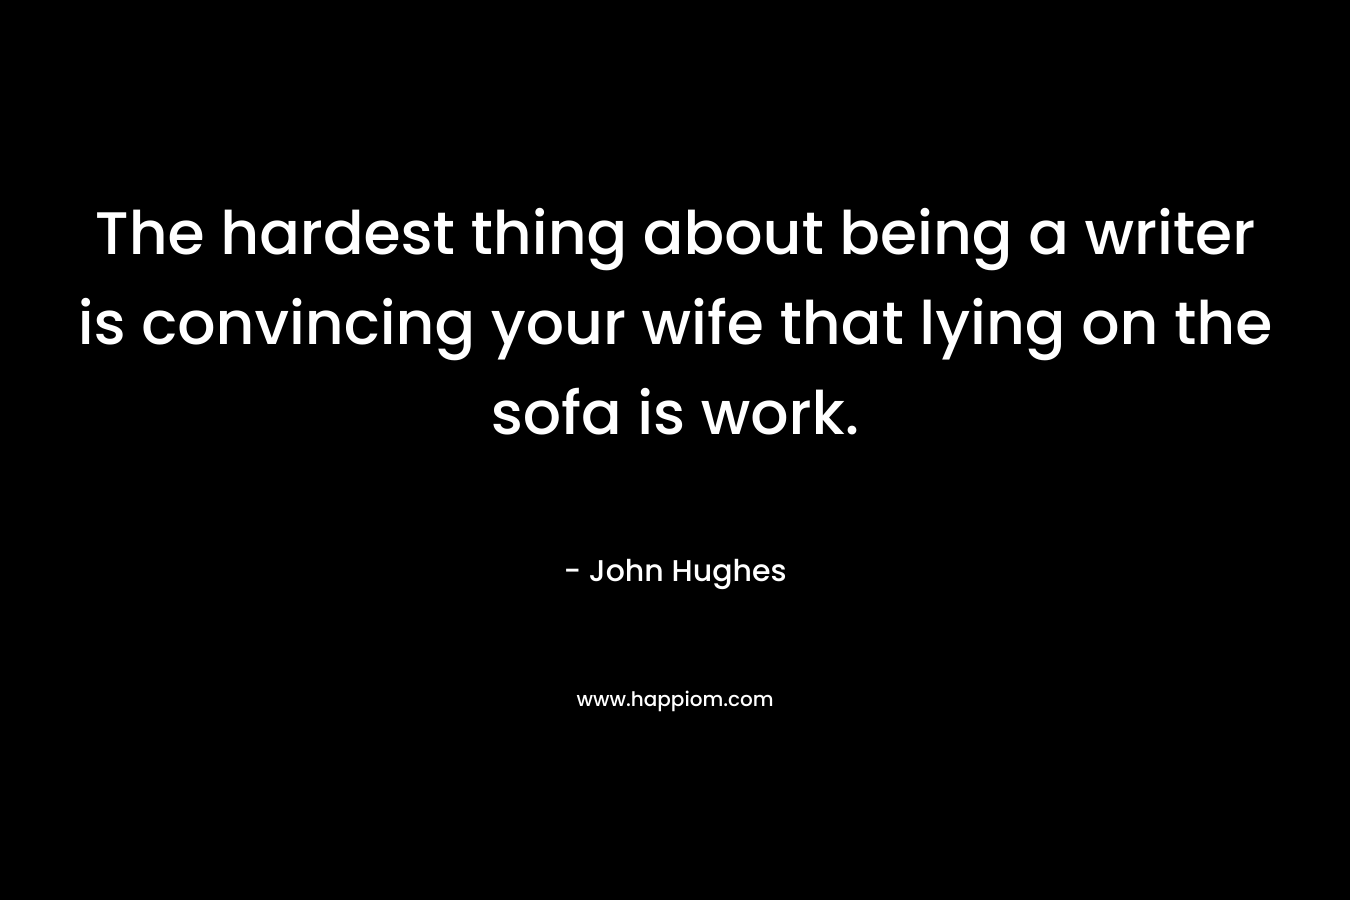 The hardest thing about being a writer is convincing your wife that lying on the sofa is work. – John Hughes